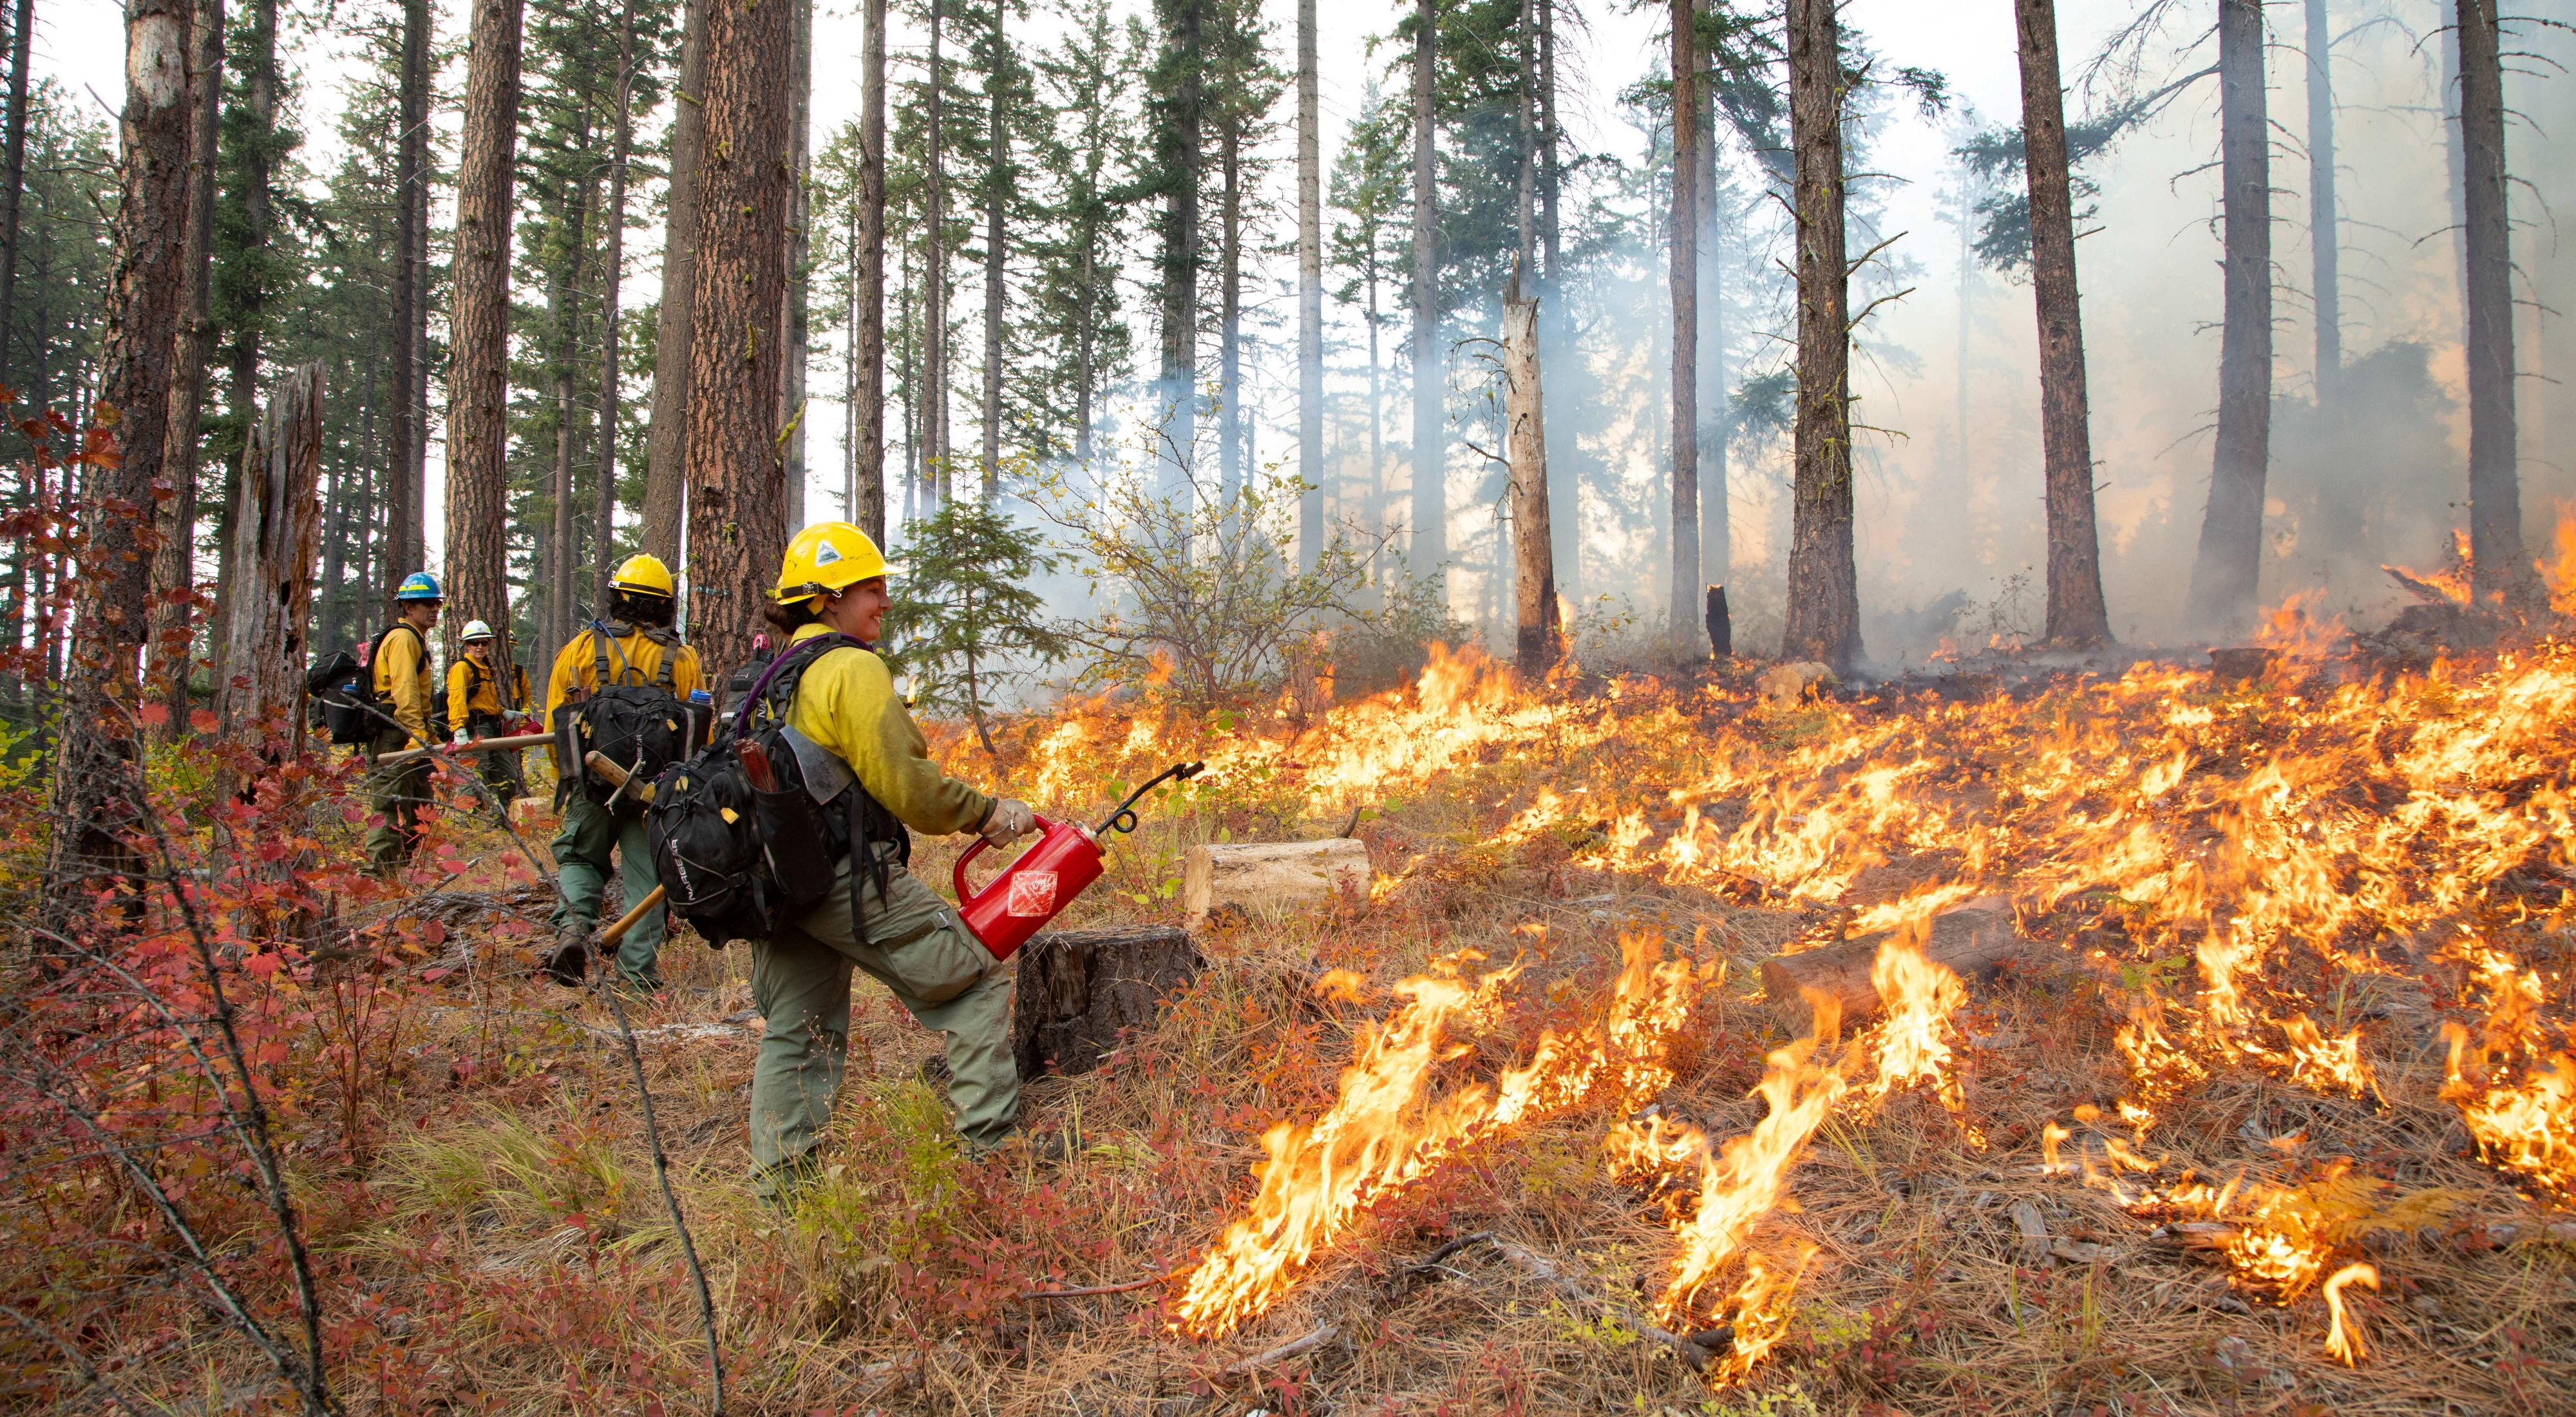 Prescribed fire practitioners execute a 6-acre burn in the Roslyn Urban Forest as part of the 2021 Cascadia Prescribed Fire Training Exchange near Roslyn, WA.